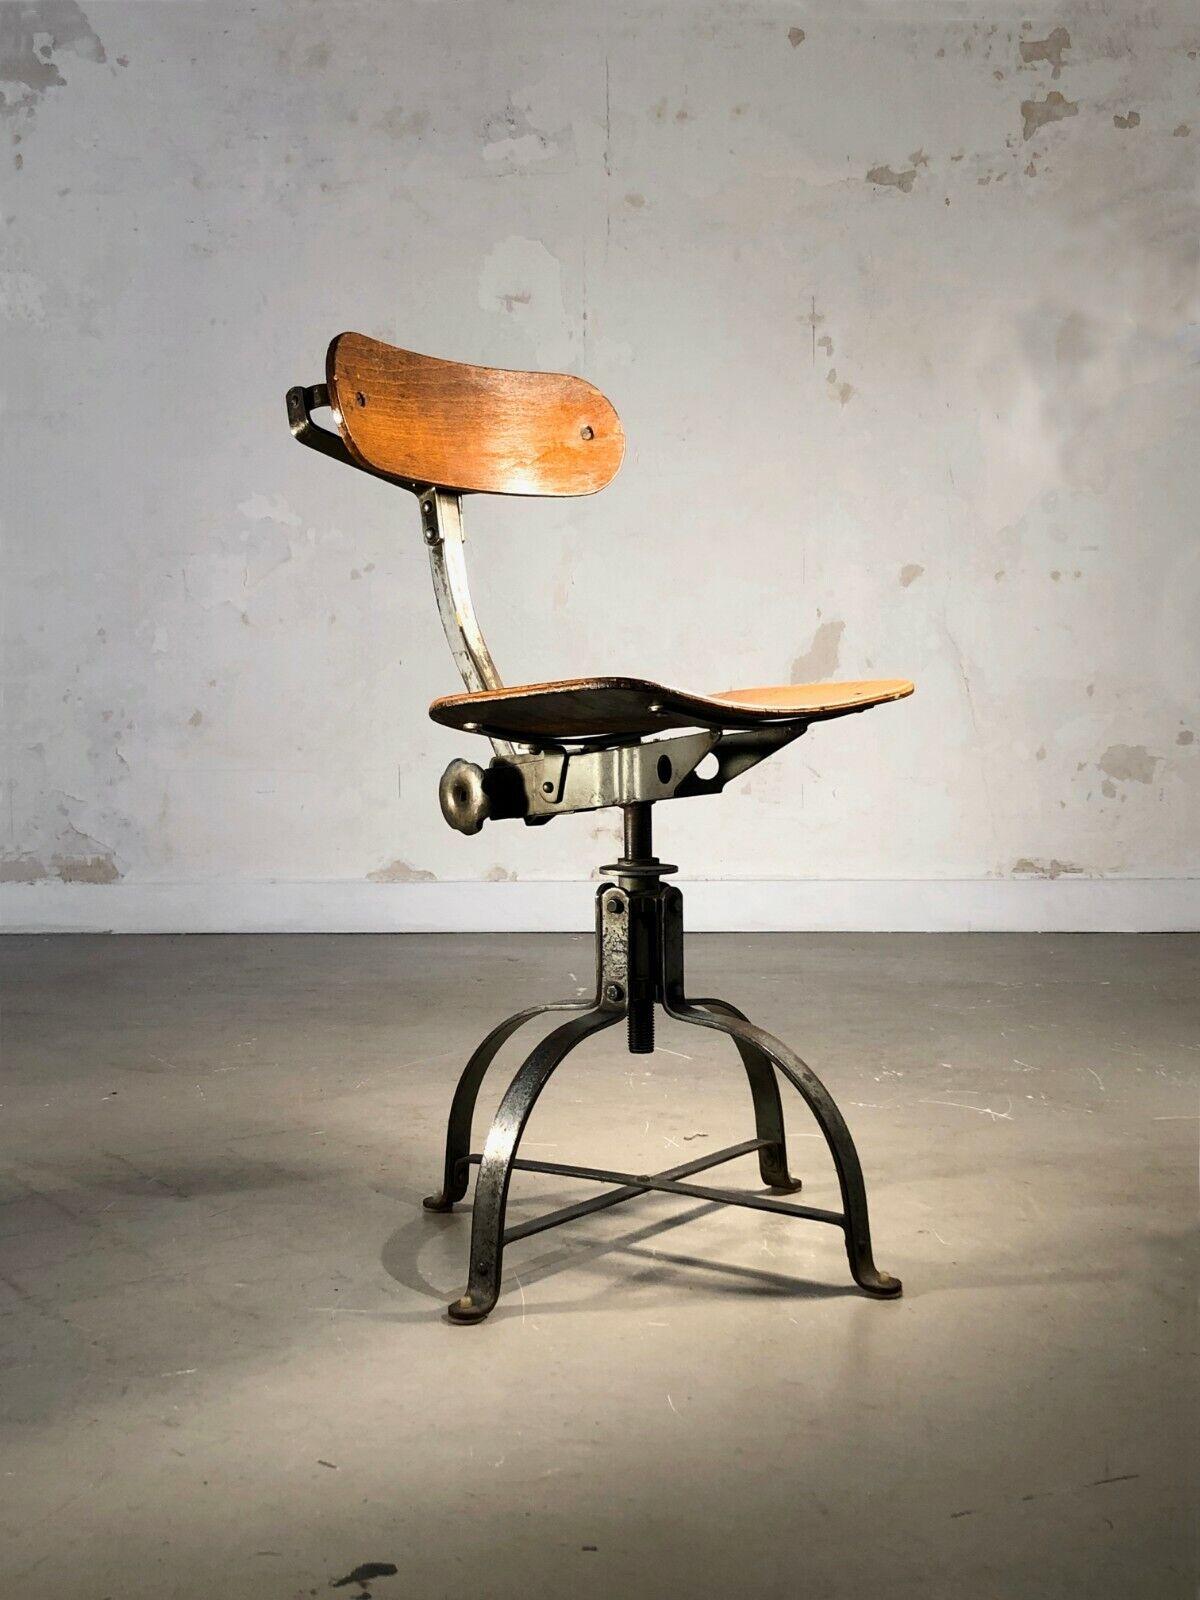 A telescopic workshop chair, Modernist, Bauhaus, Constructivist, Reconstruction, metal structure with telescopic system, seat and reclining back in solid wood, to be attributed, France 1950.

DIMENSIONS: H 82 x L 40 x D 38 in the photos

CONDITION: